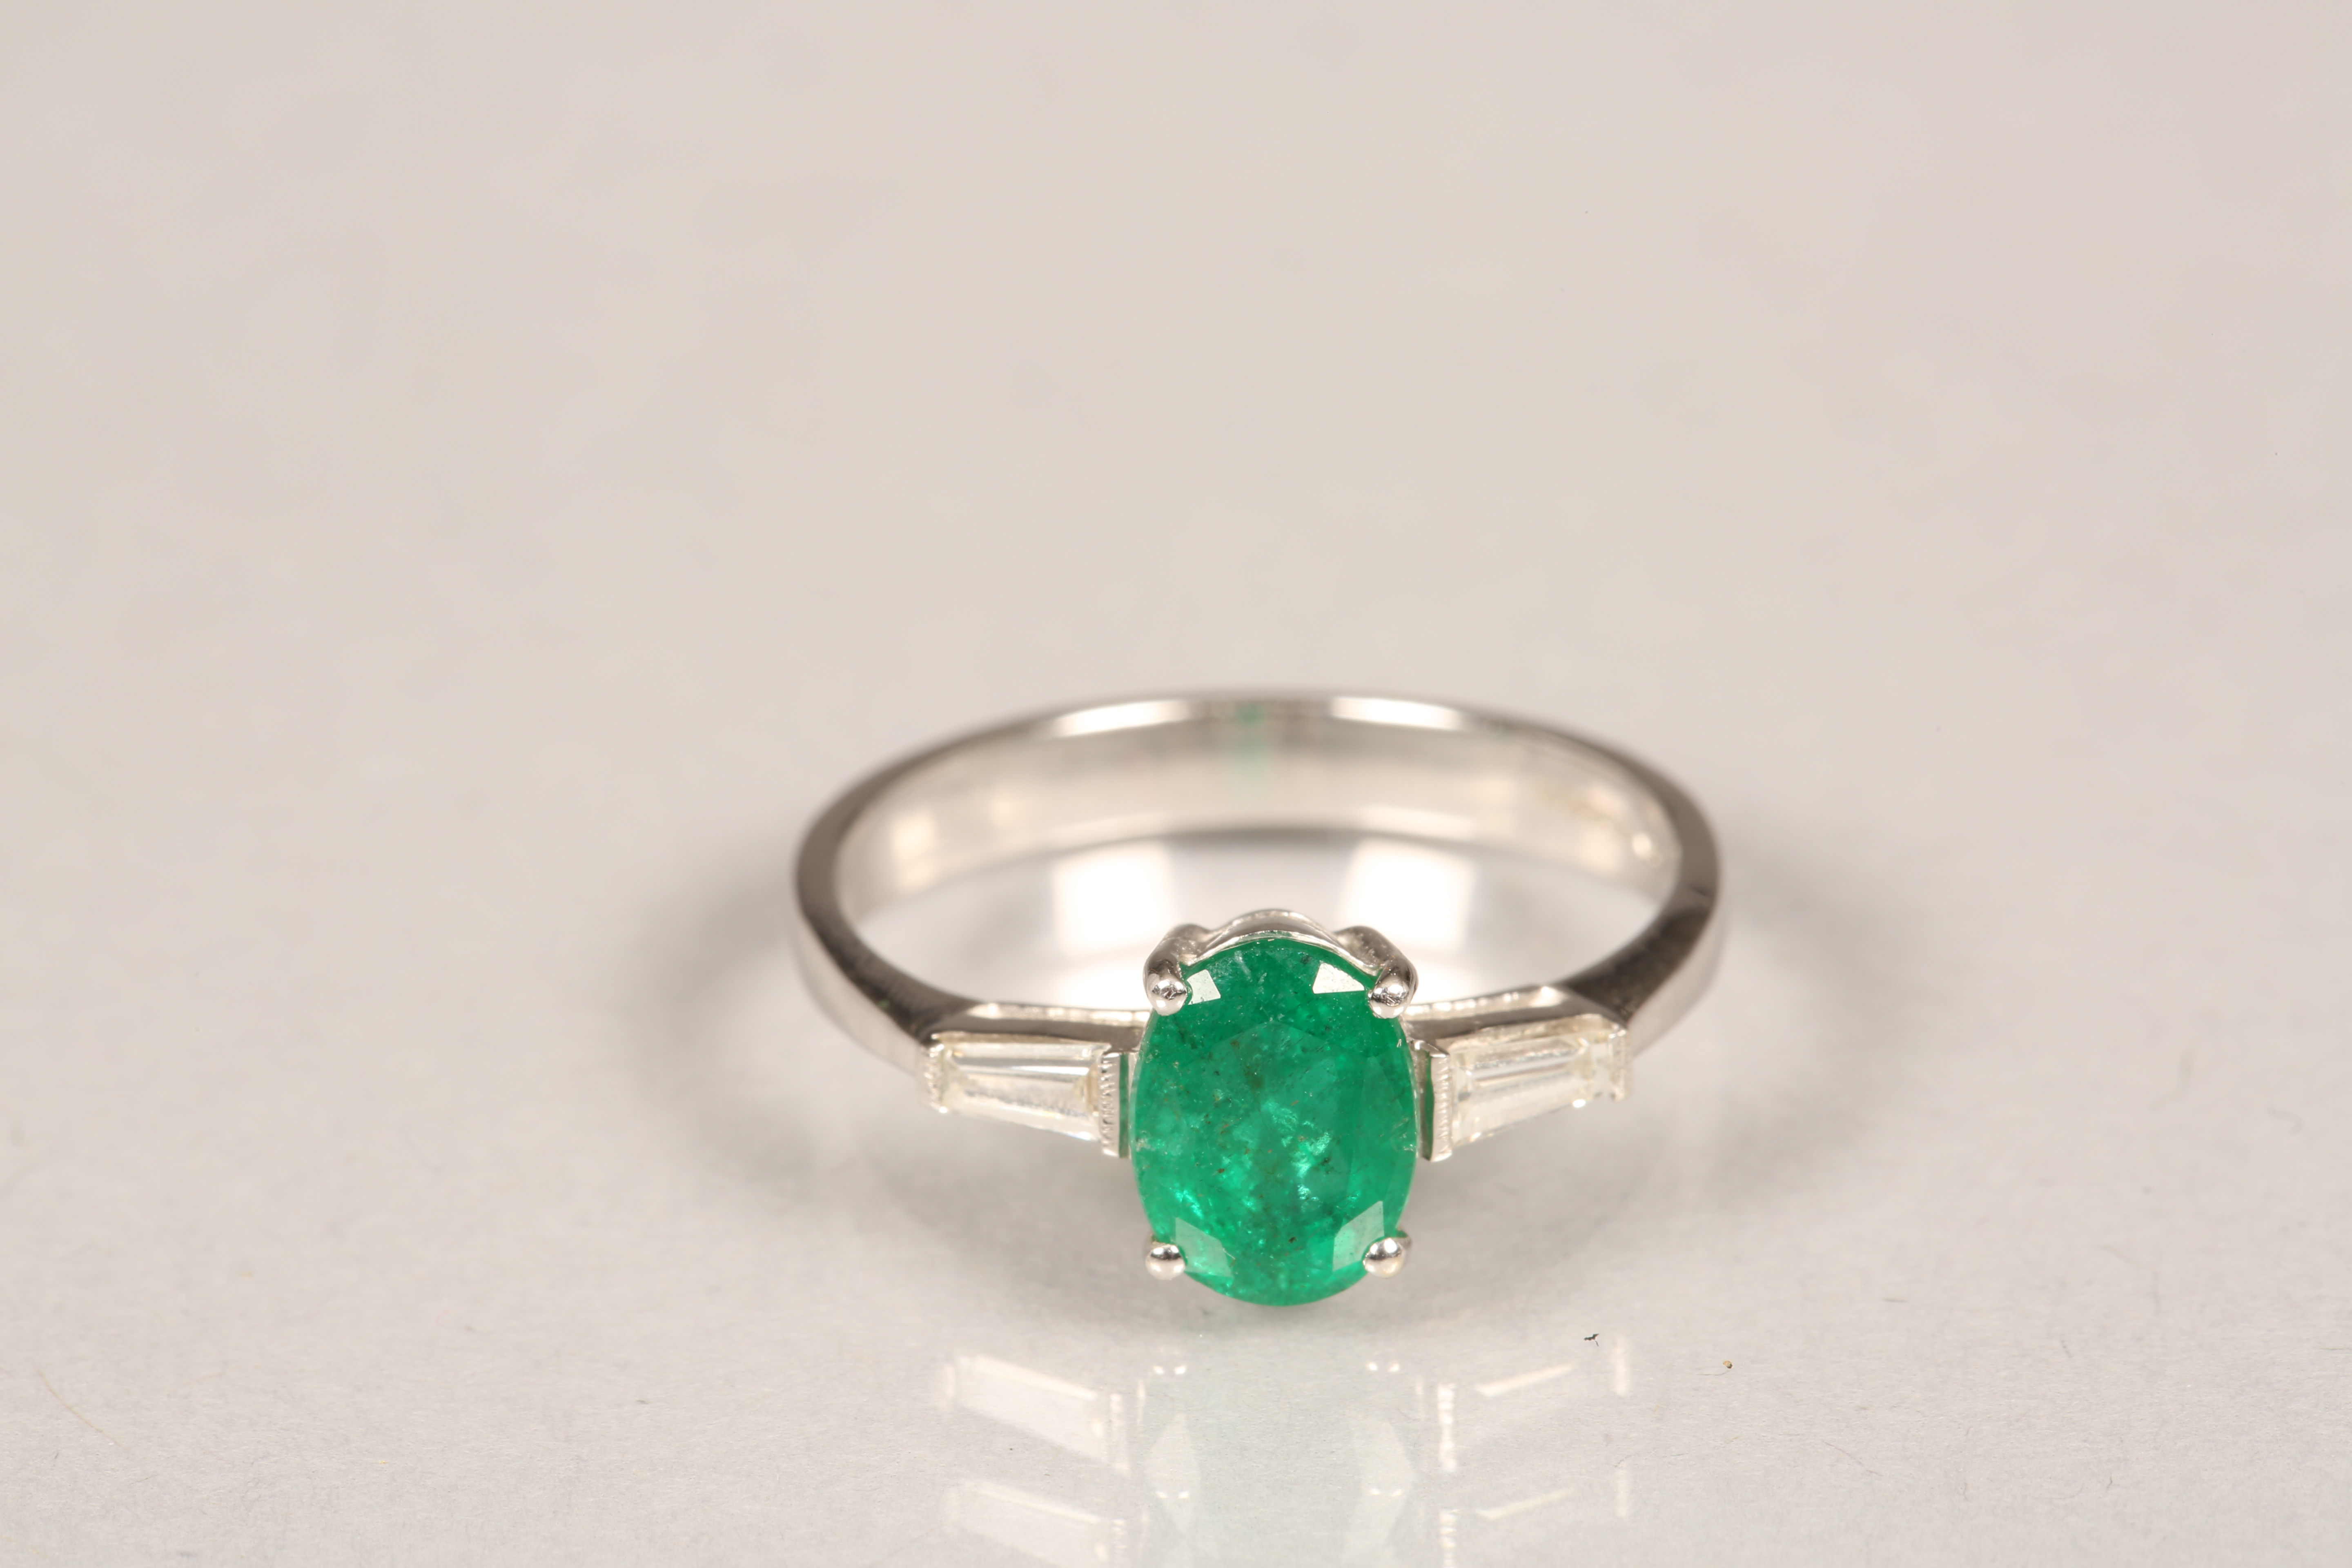 Ladies 18 carat white gold emerald and diamond ring, central emerald flanked by a baguette cut